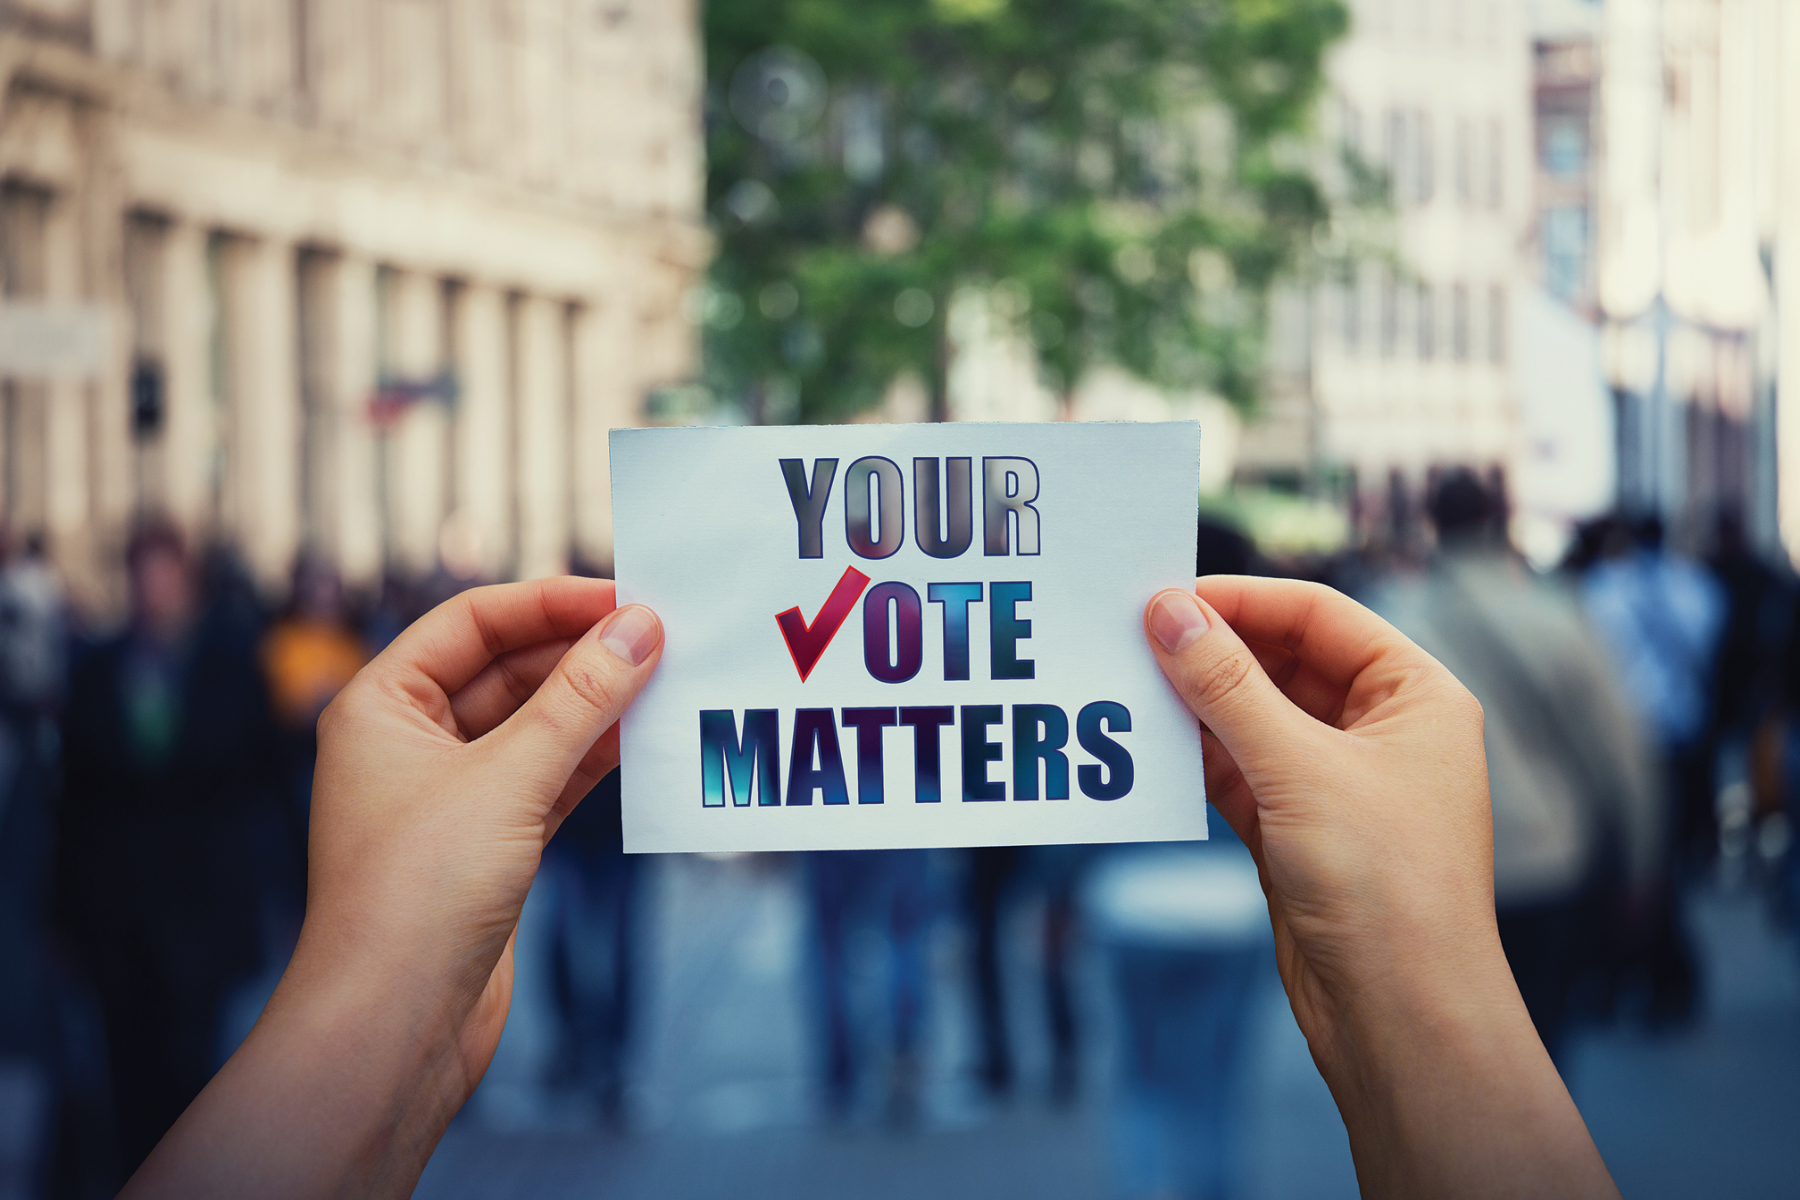 Both hands are holding a piece of paper with the words "your vote matters" written on it